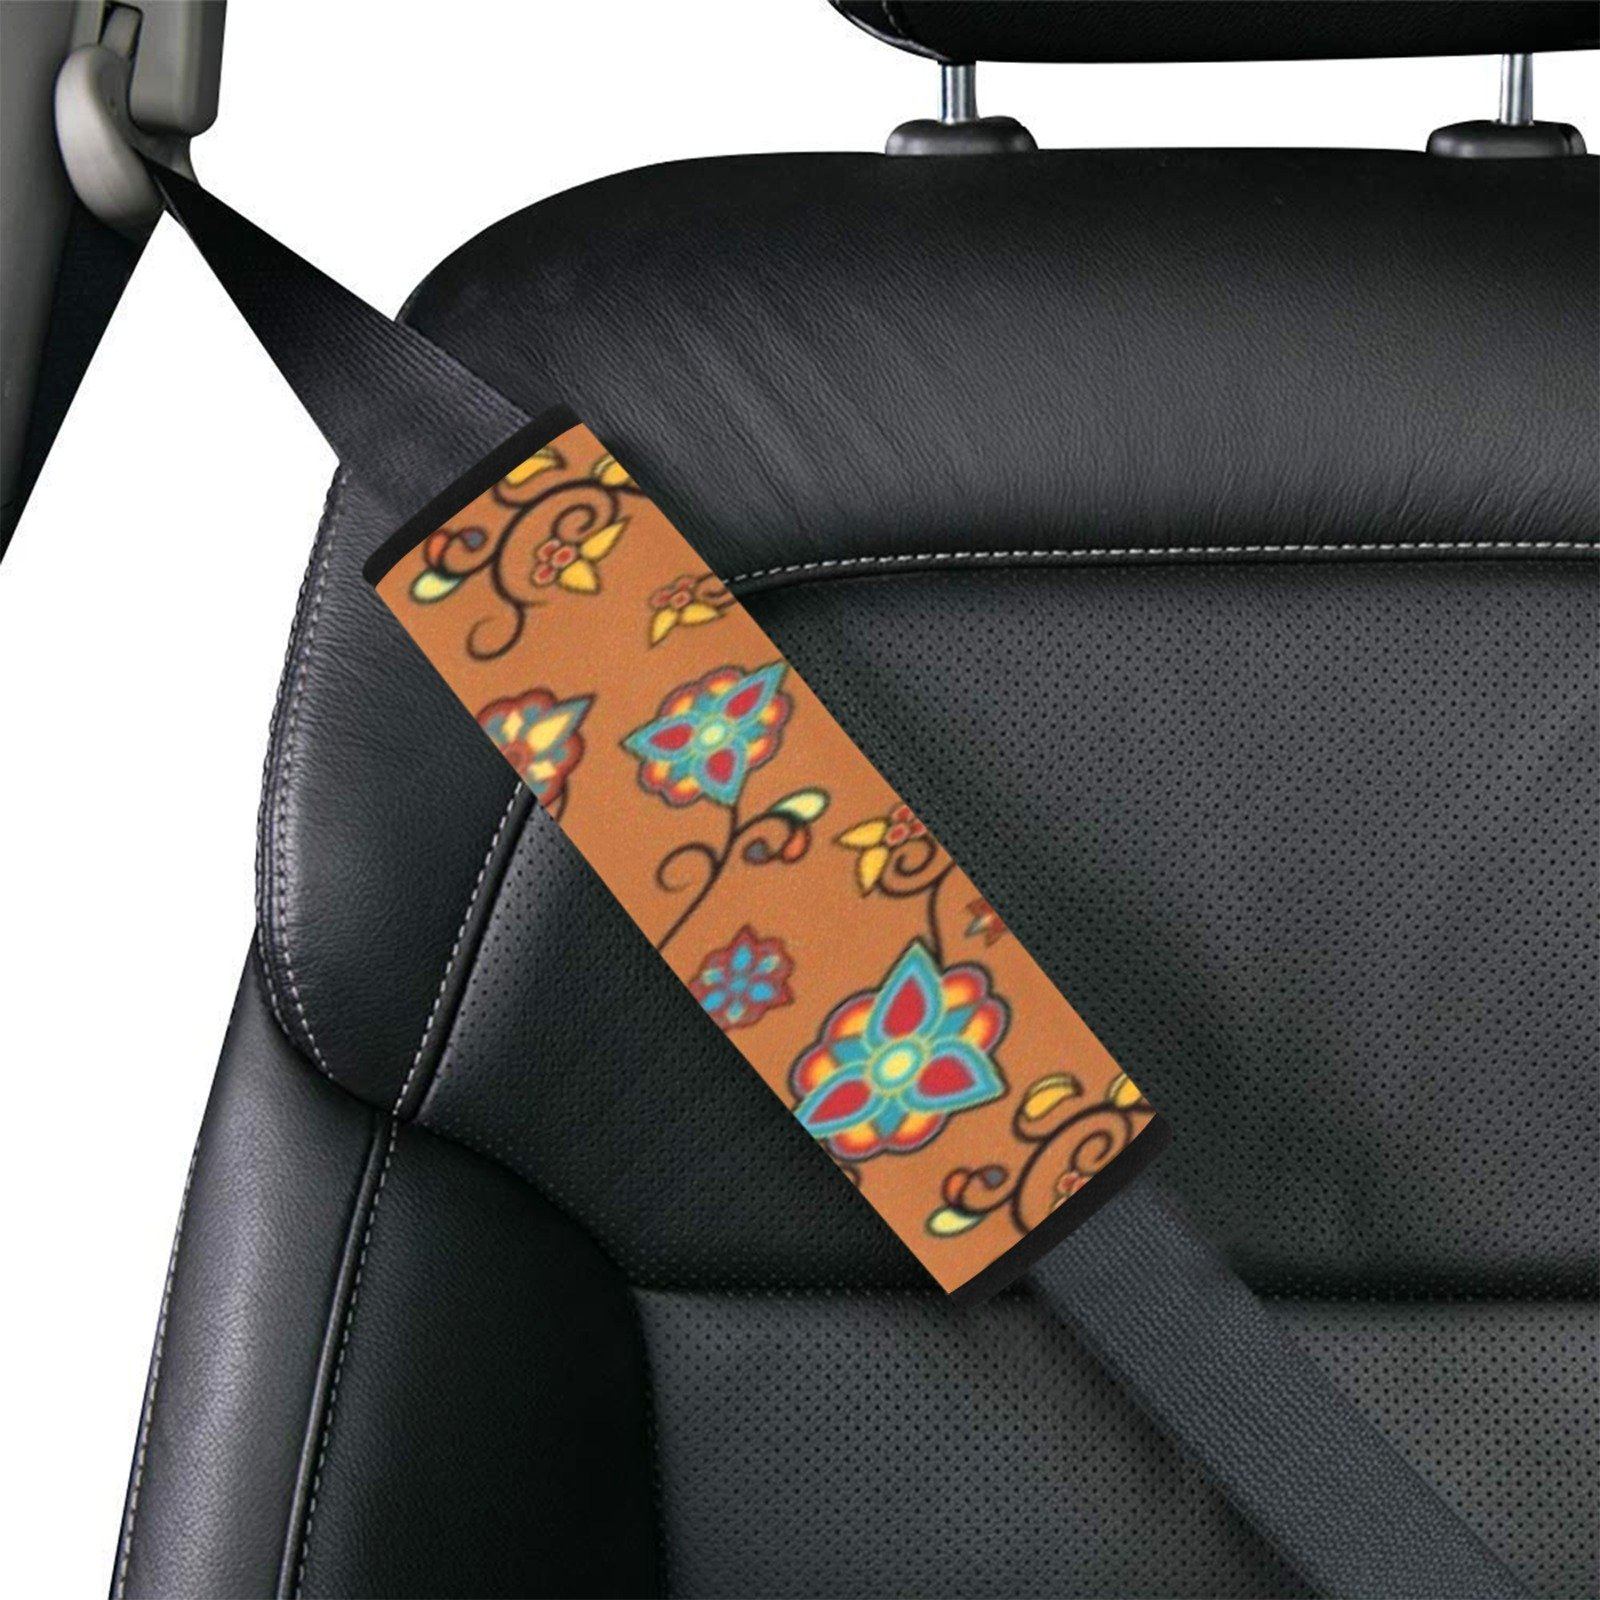 Fire Bloom Light Car Seat Belt Cover 7''x12.6'' (Pack of 2) Car Seat Belt Cover 7x12.6 (Pack of 2) e-joyer 